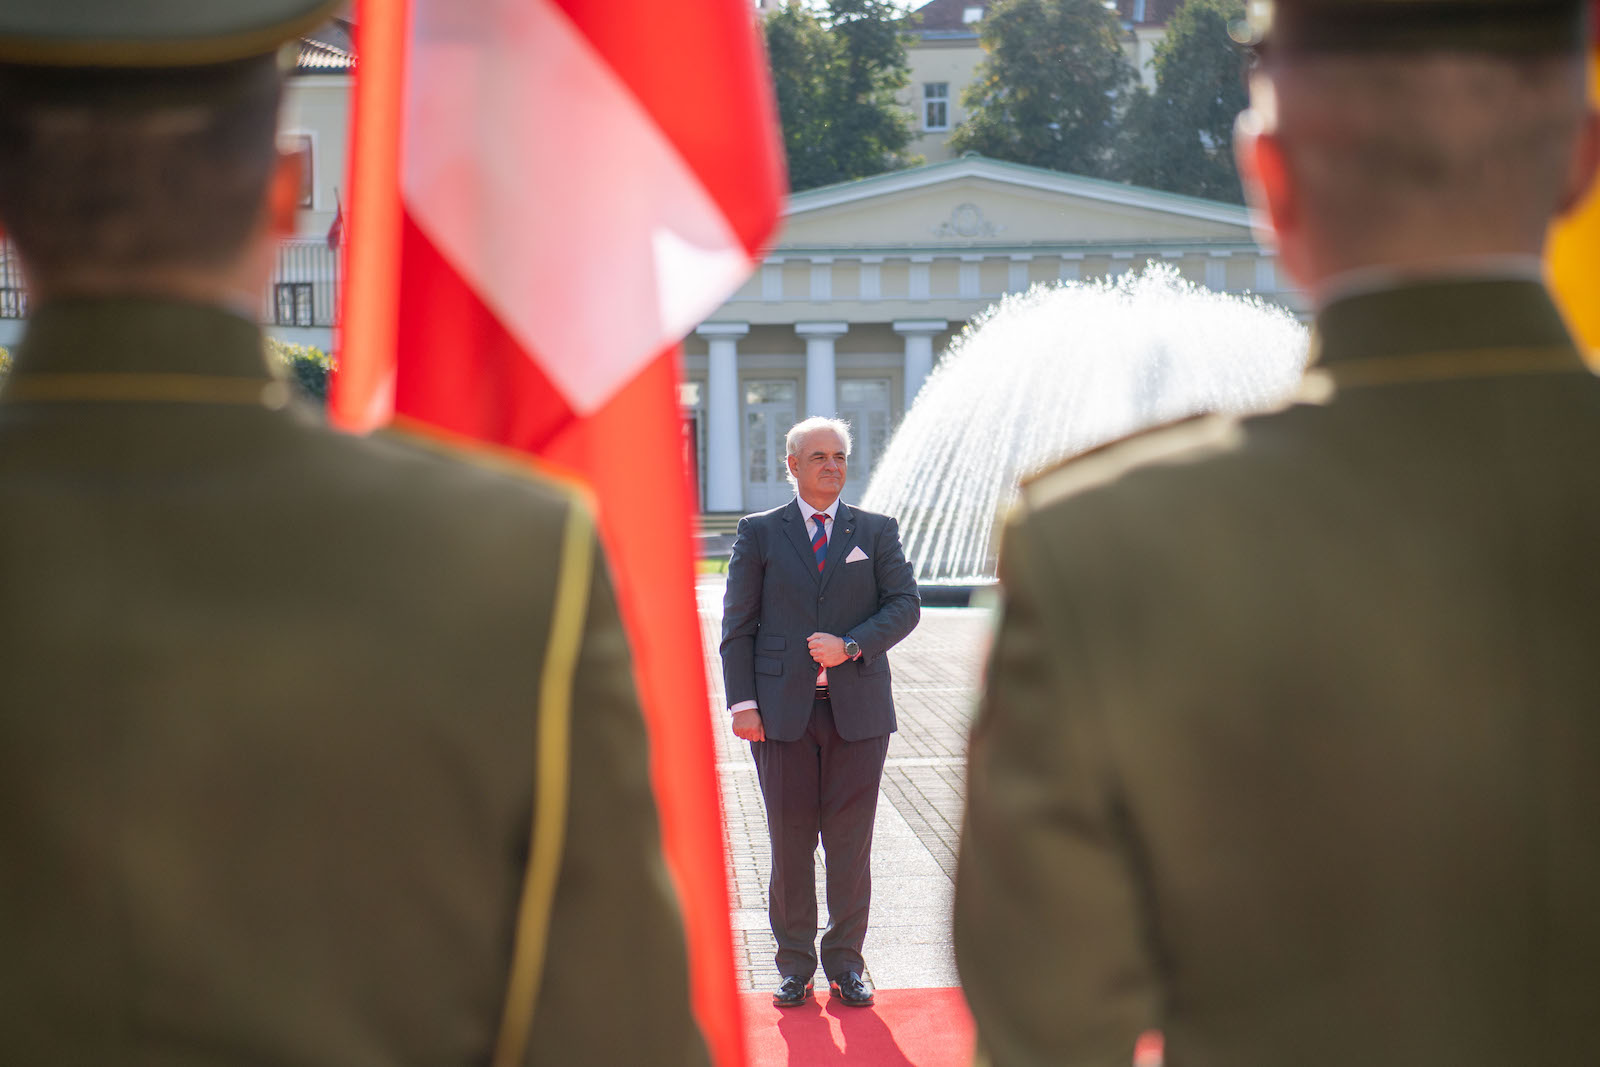 The Ambassador of the Sovereign Order of Malta to Lithuania presents his letters of credence